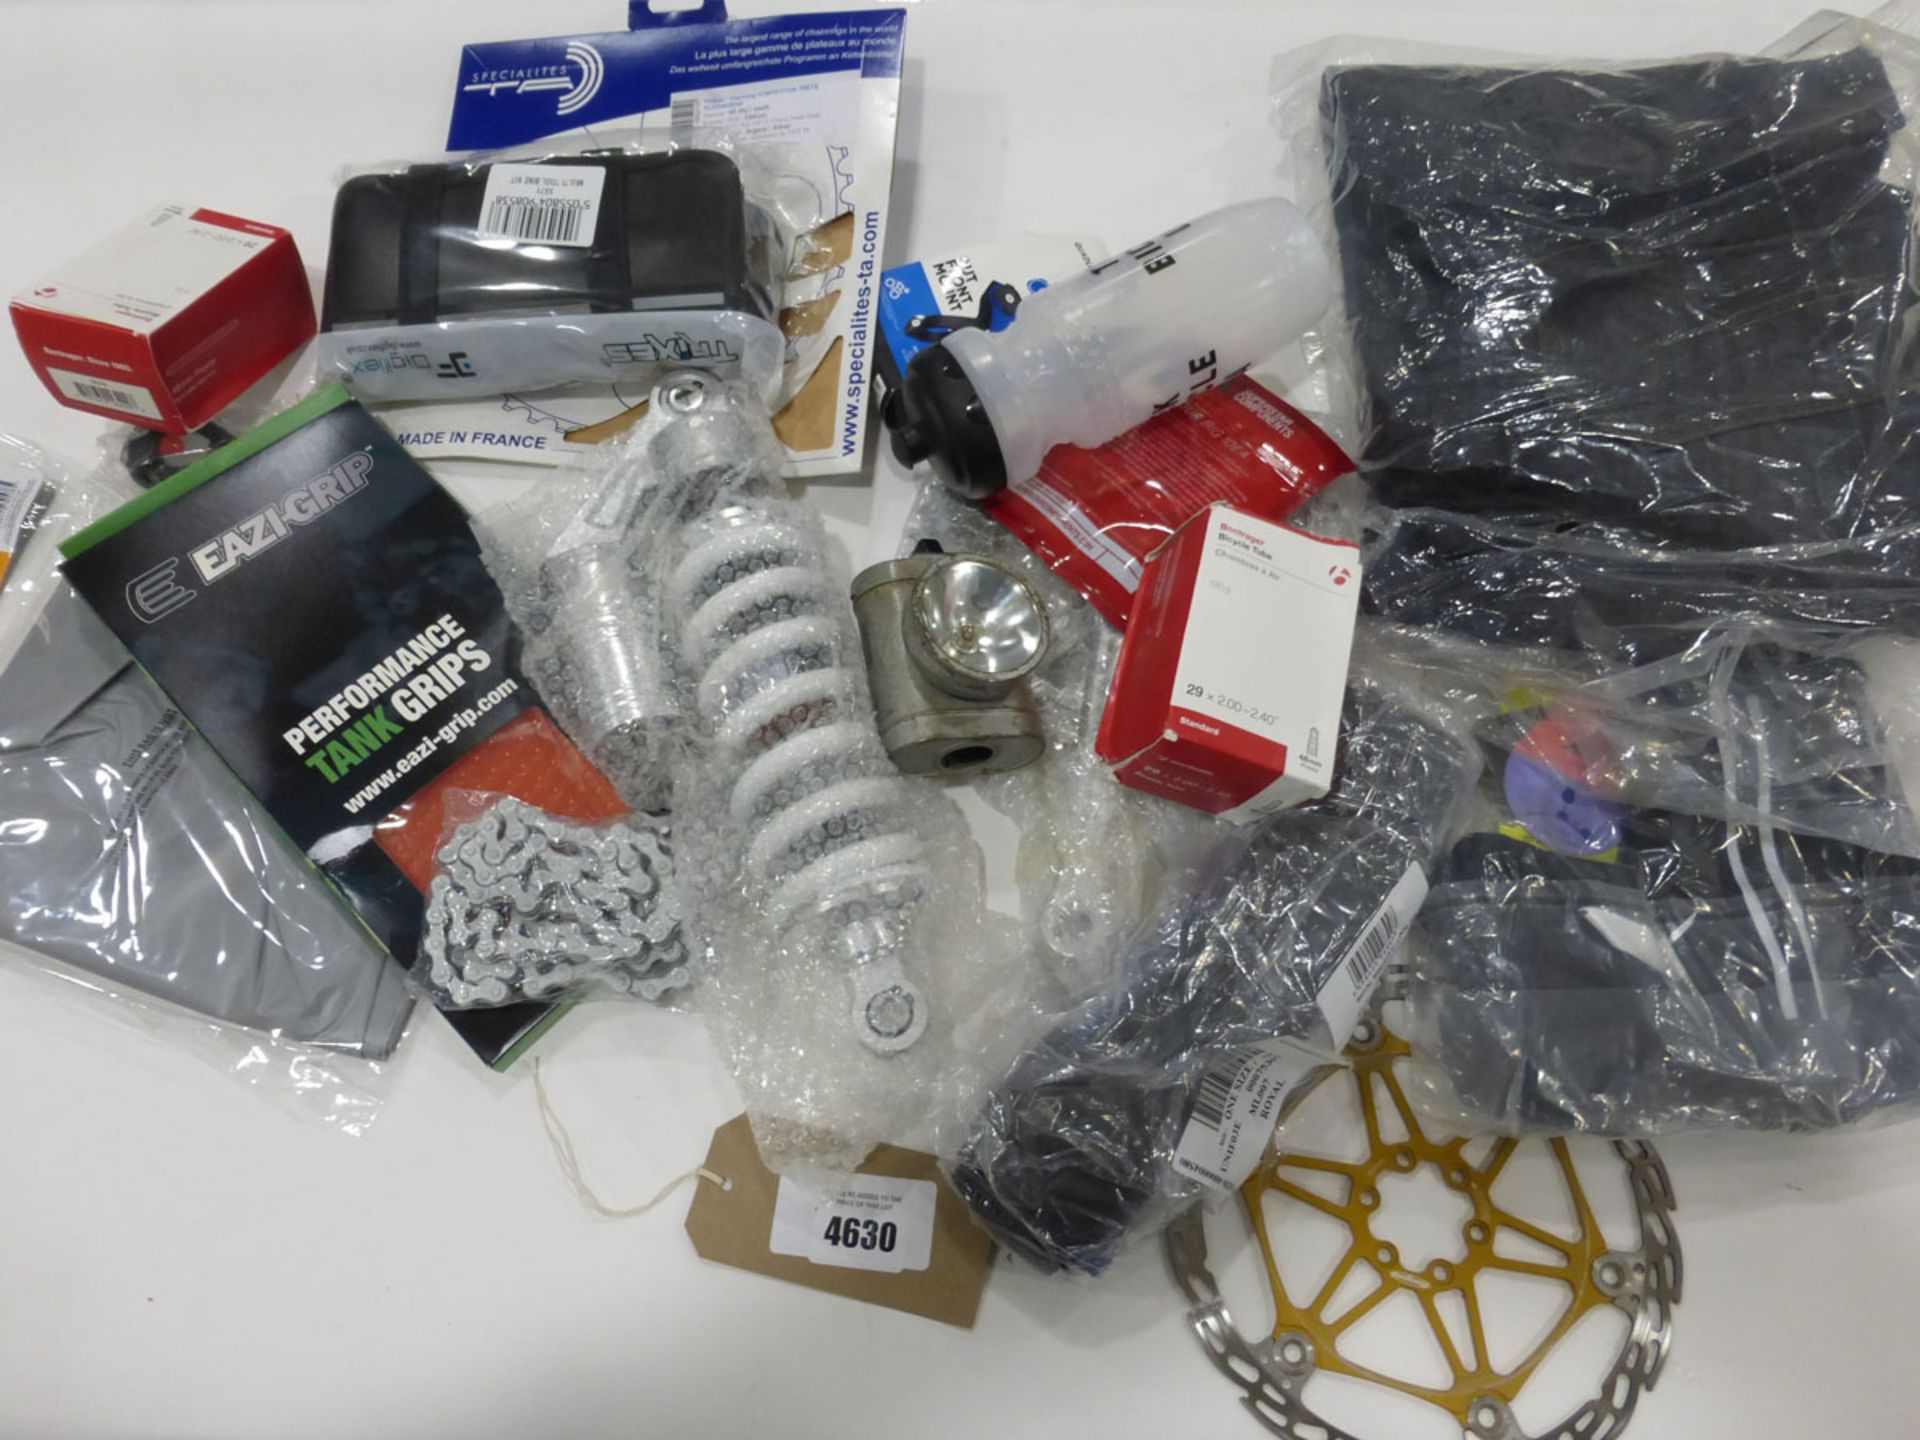 Bag of bike and motorbike parts incl. shock absorbers, chain, clothing, cogs, water bottles, bike